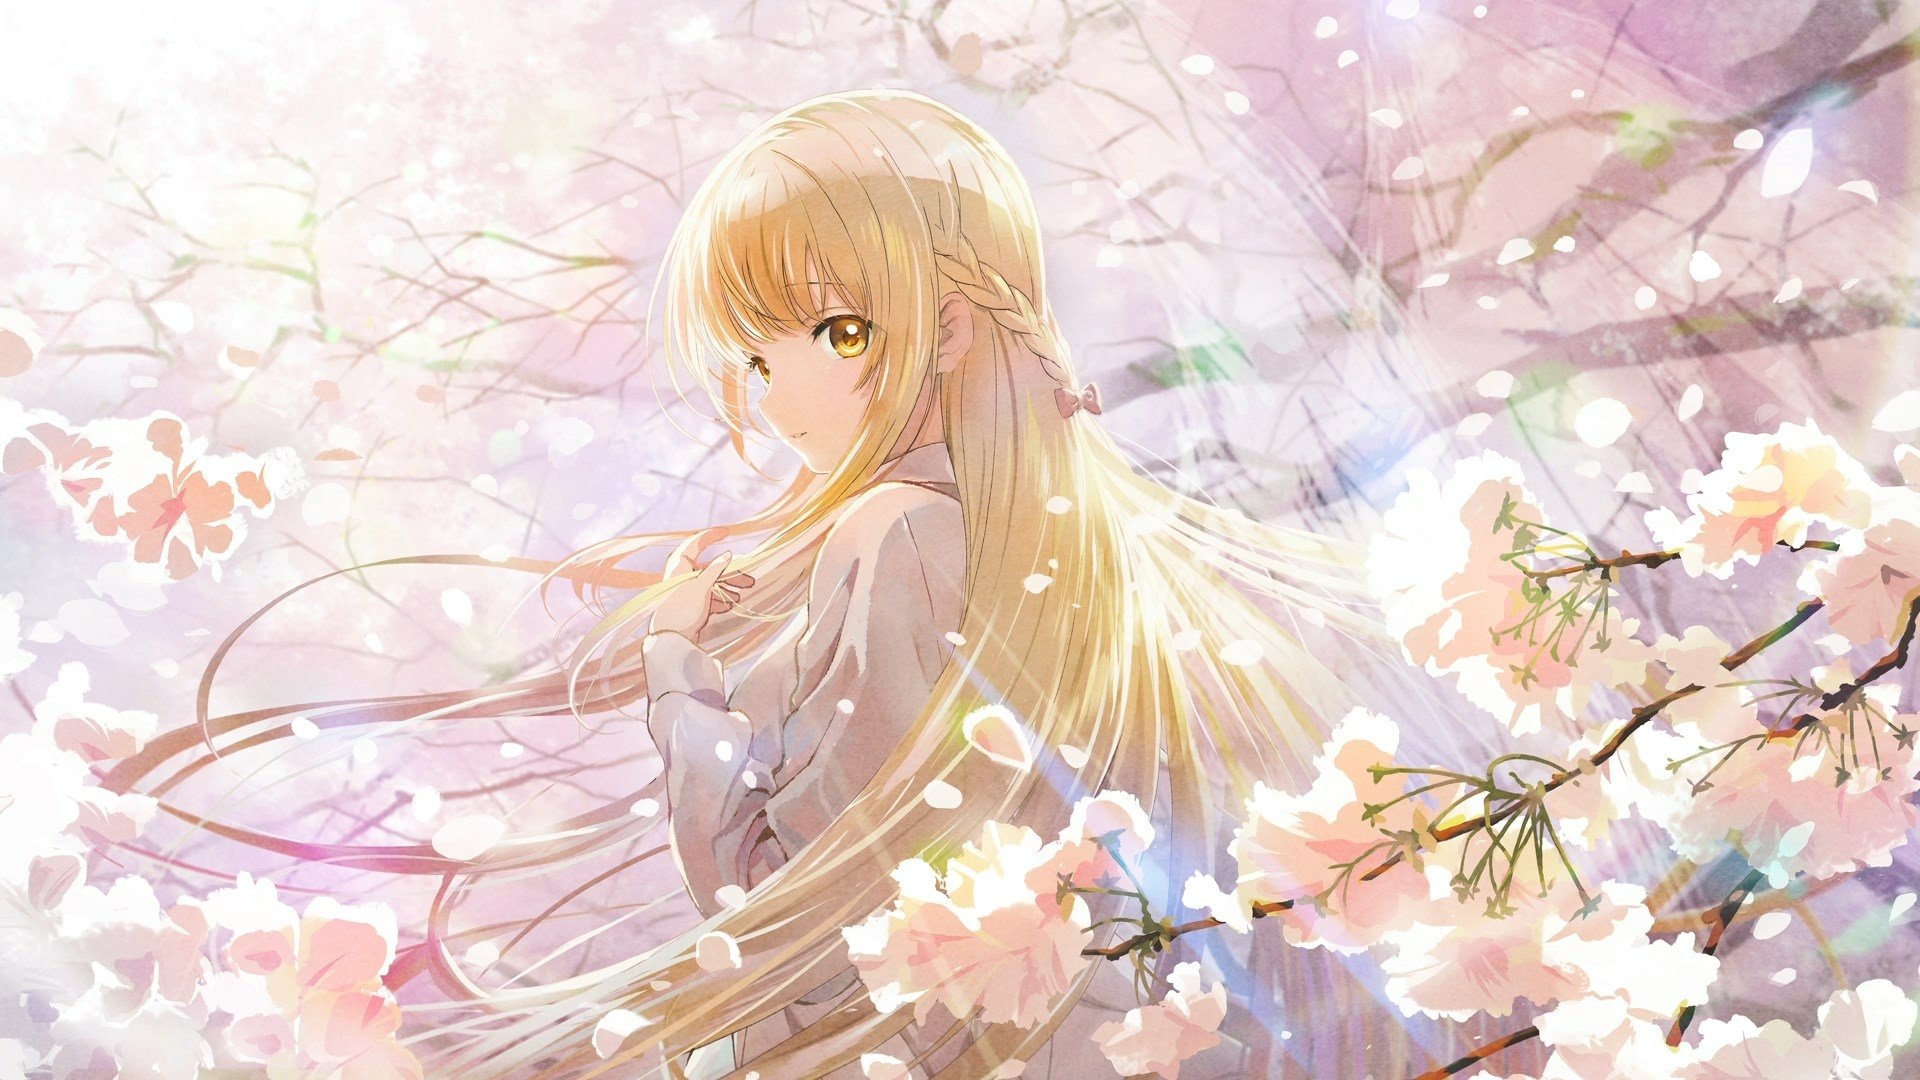 Mahiru Shiina from The Angel Next Door Spoils Me Rotten in an HD desktop wallpaper with a serene and captivating anime scene.